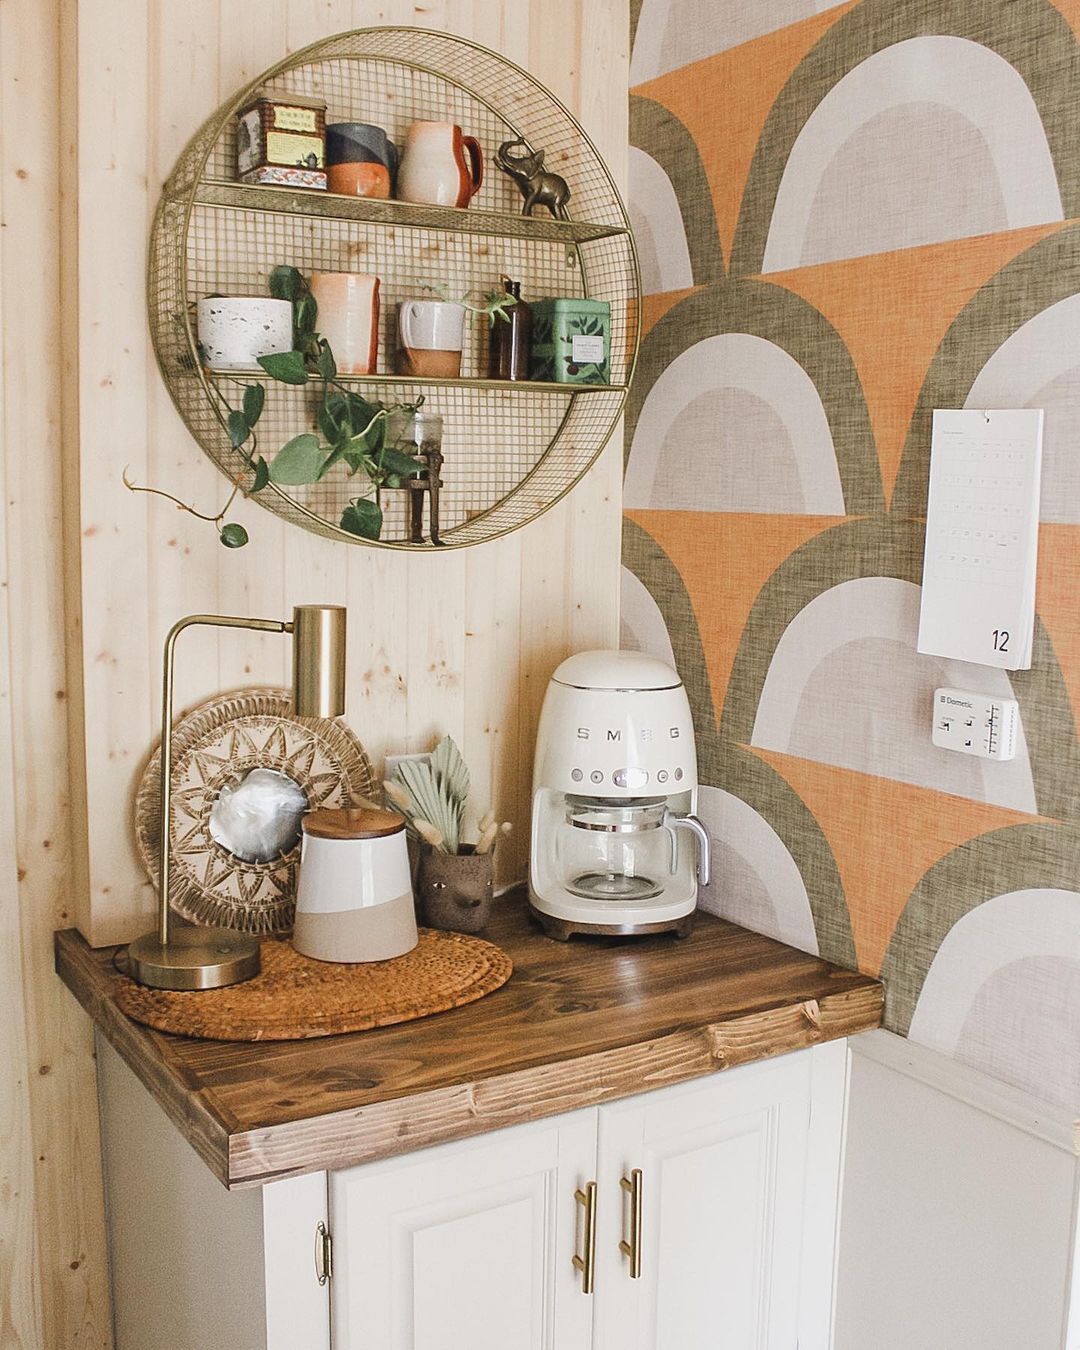 Corner coffee station in an RV with patterned wallpaper. Photo by Instagram user @the_ramblr_rv.